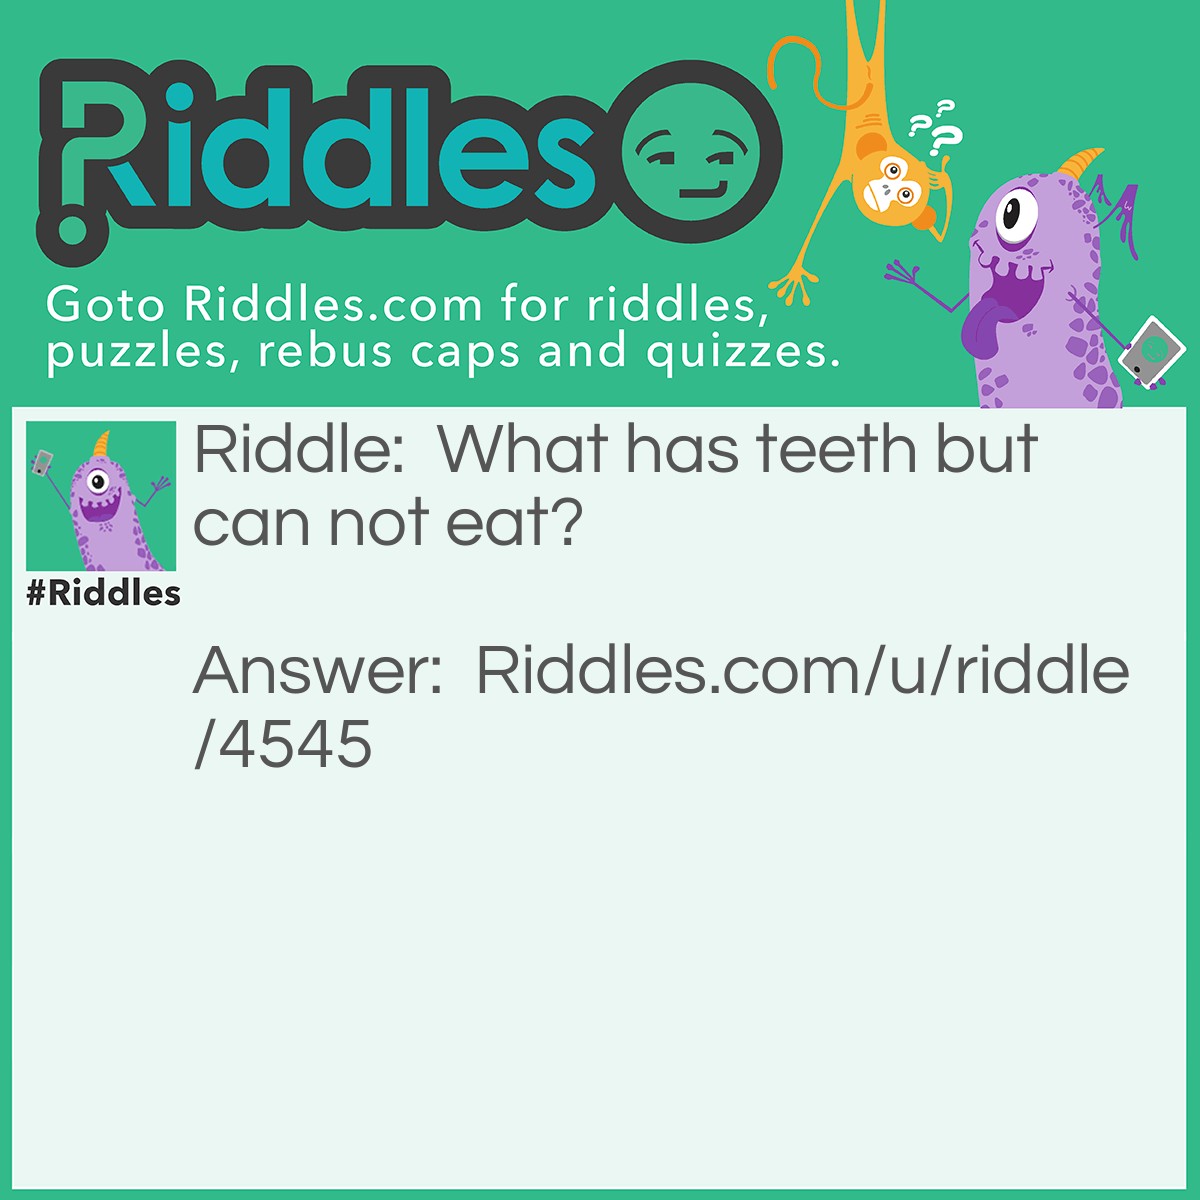 Riddle: What has teeth but can not eat? Answer: A comb.